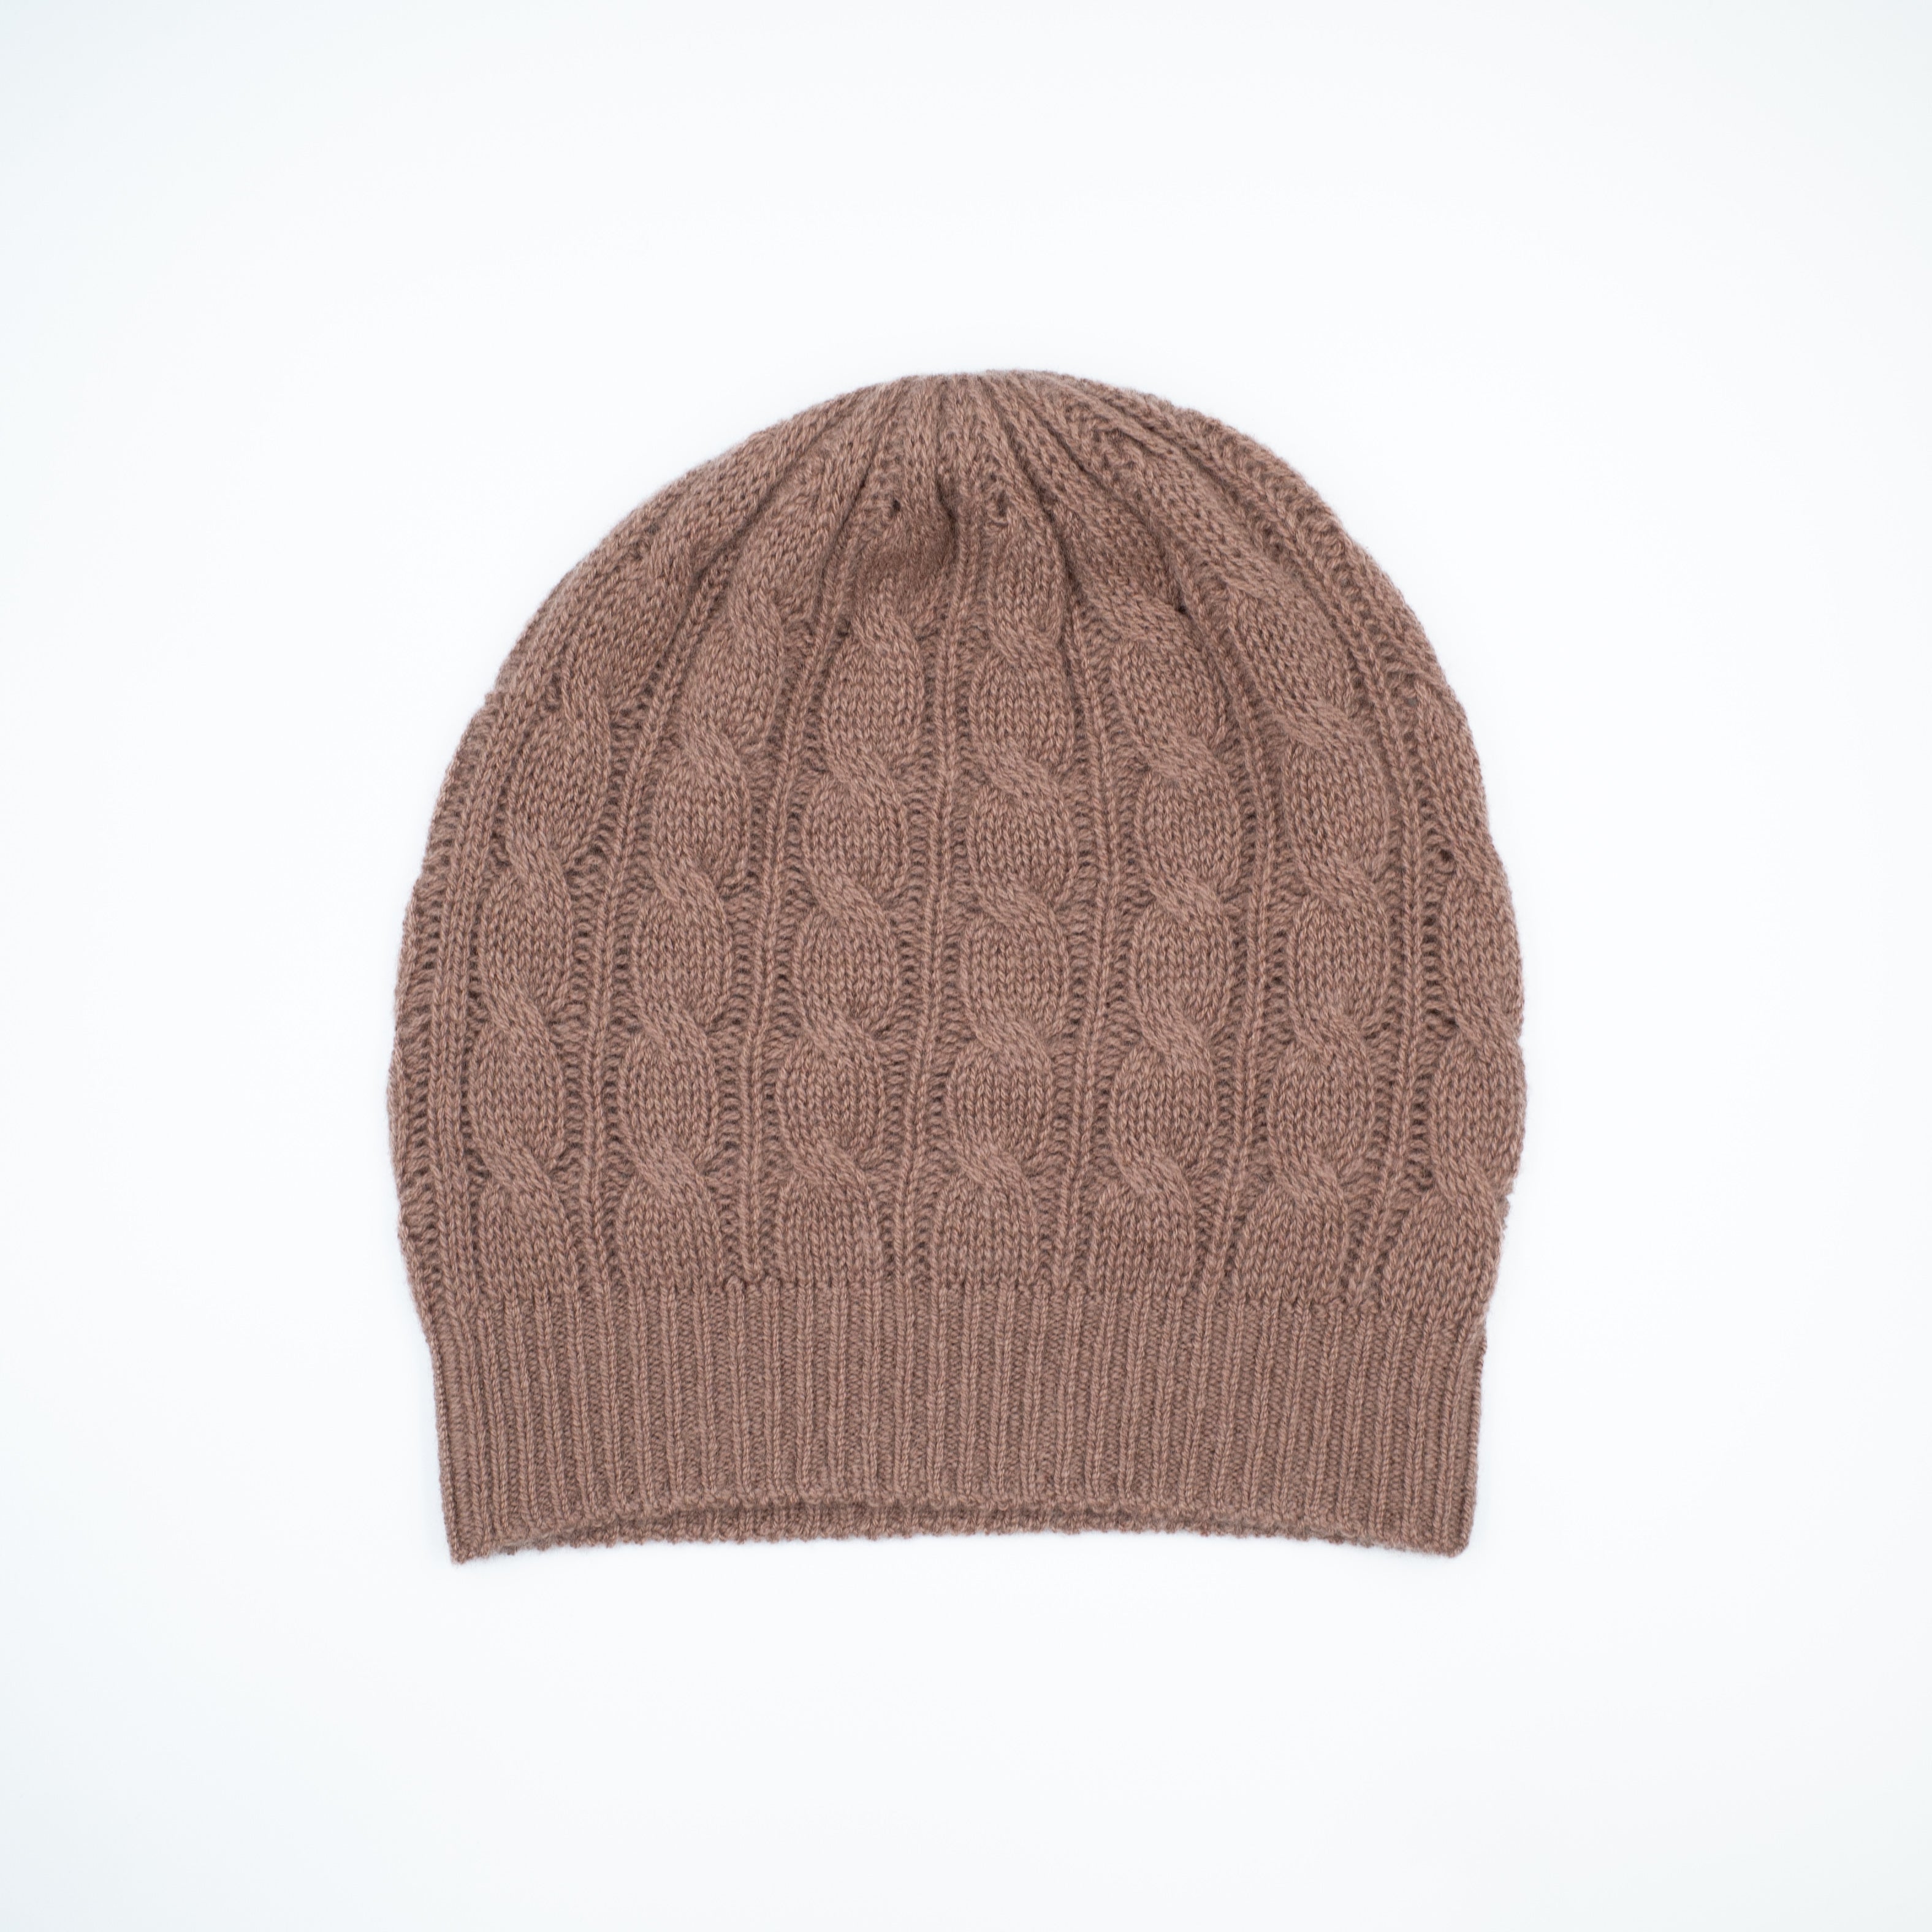 Brand New Scottish Dusky Pink Cable Knit Beanie Hat Unisex